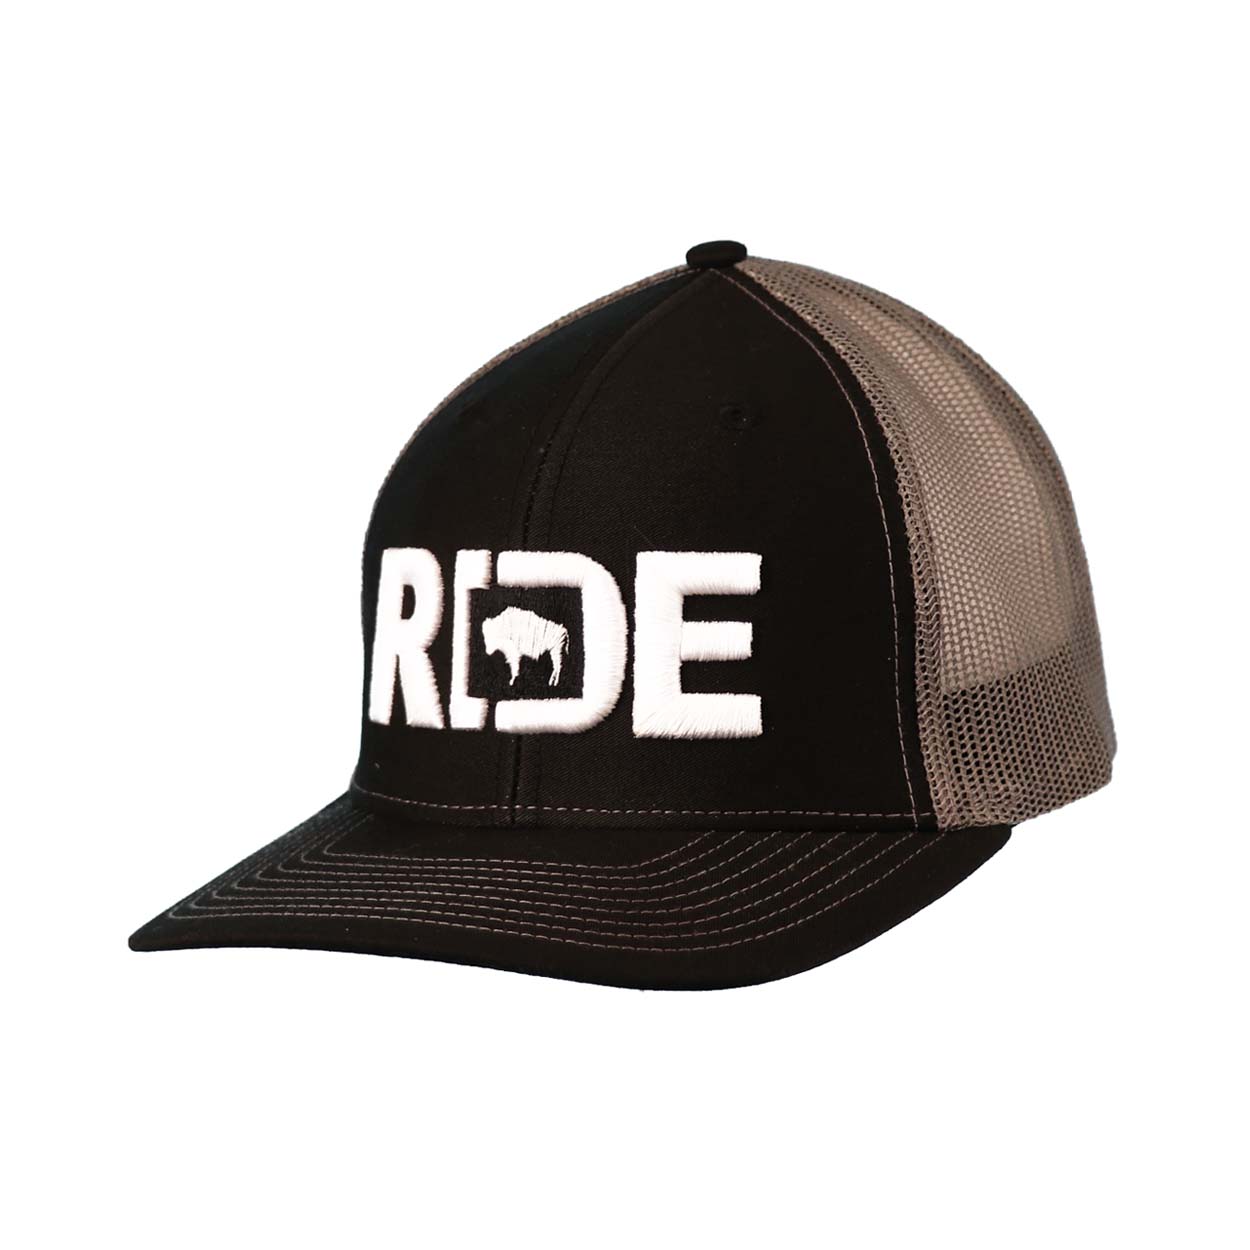 Ride Wyoming Classic Pro 3D Puff Embroidered Snapback Trucker Hat Black/Gray